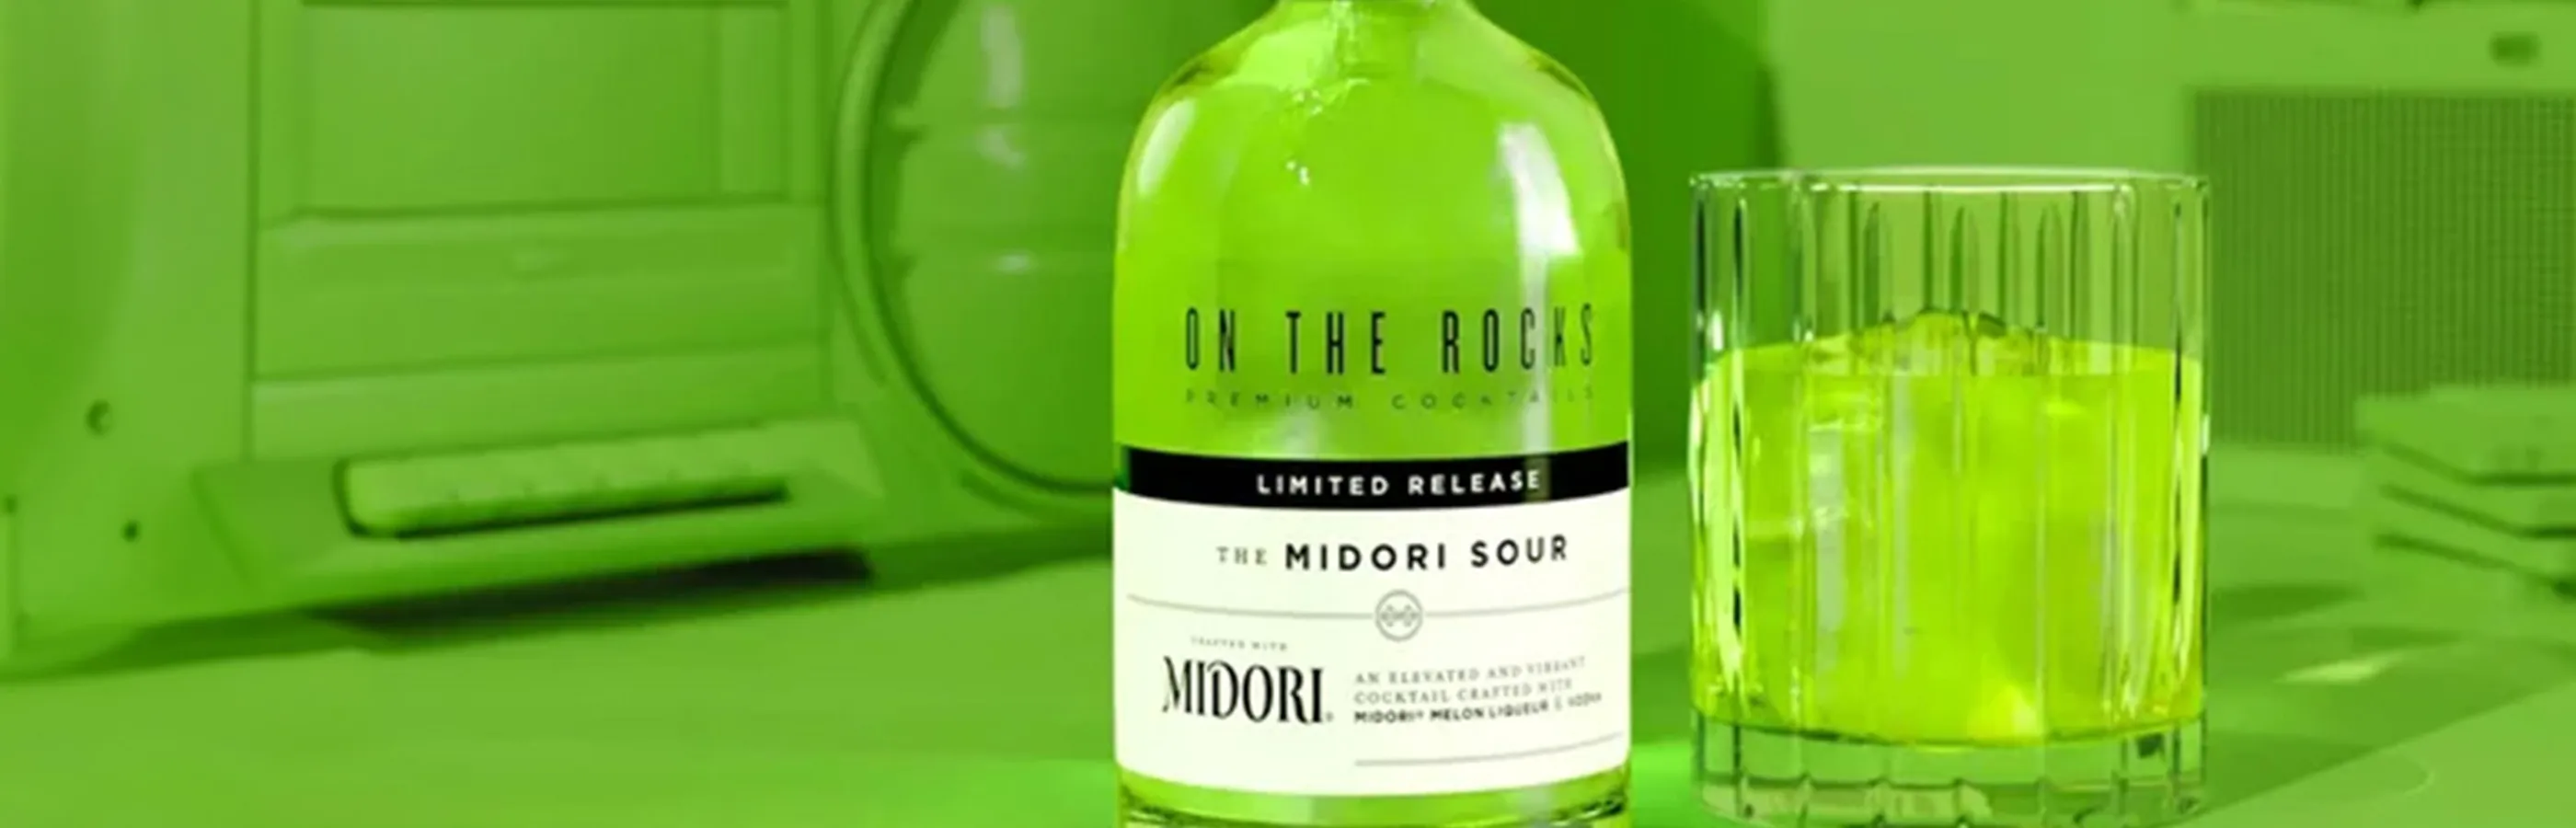 On The Rocks OTR Premium Cocktails Launches Ready-To-Drink (RTD) Midori Sour